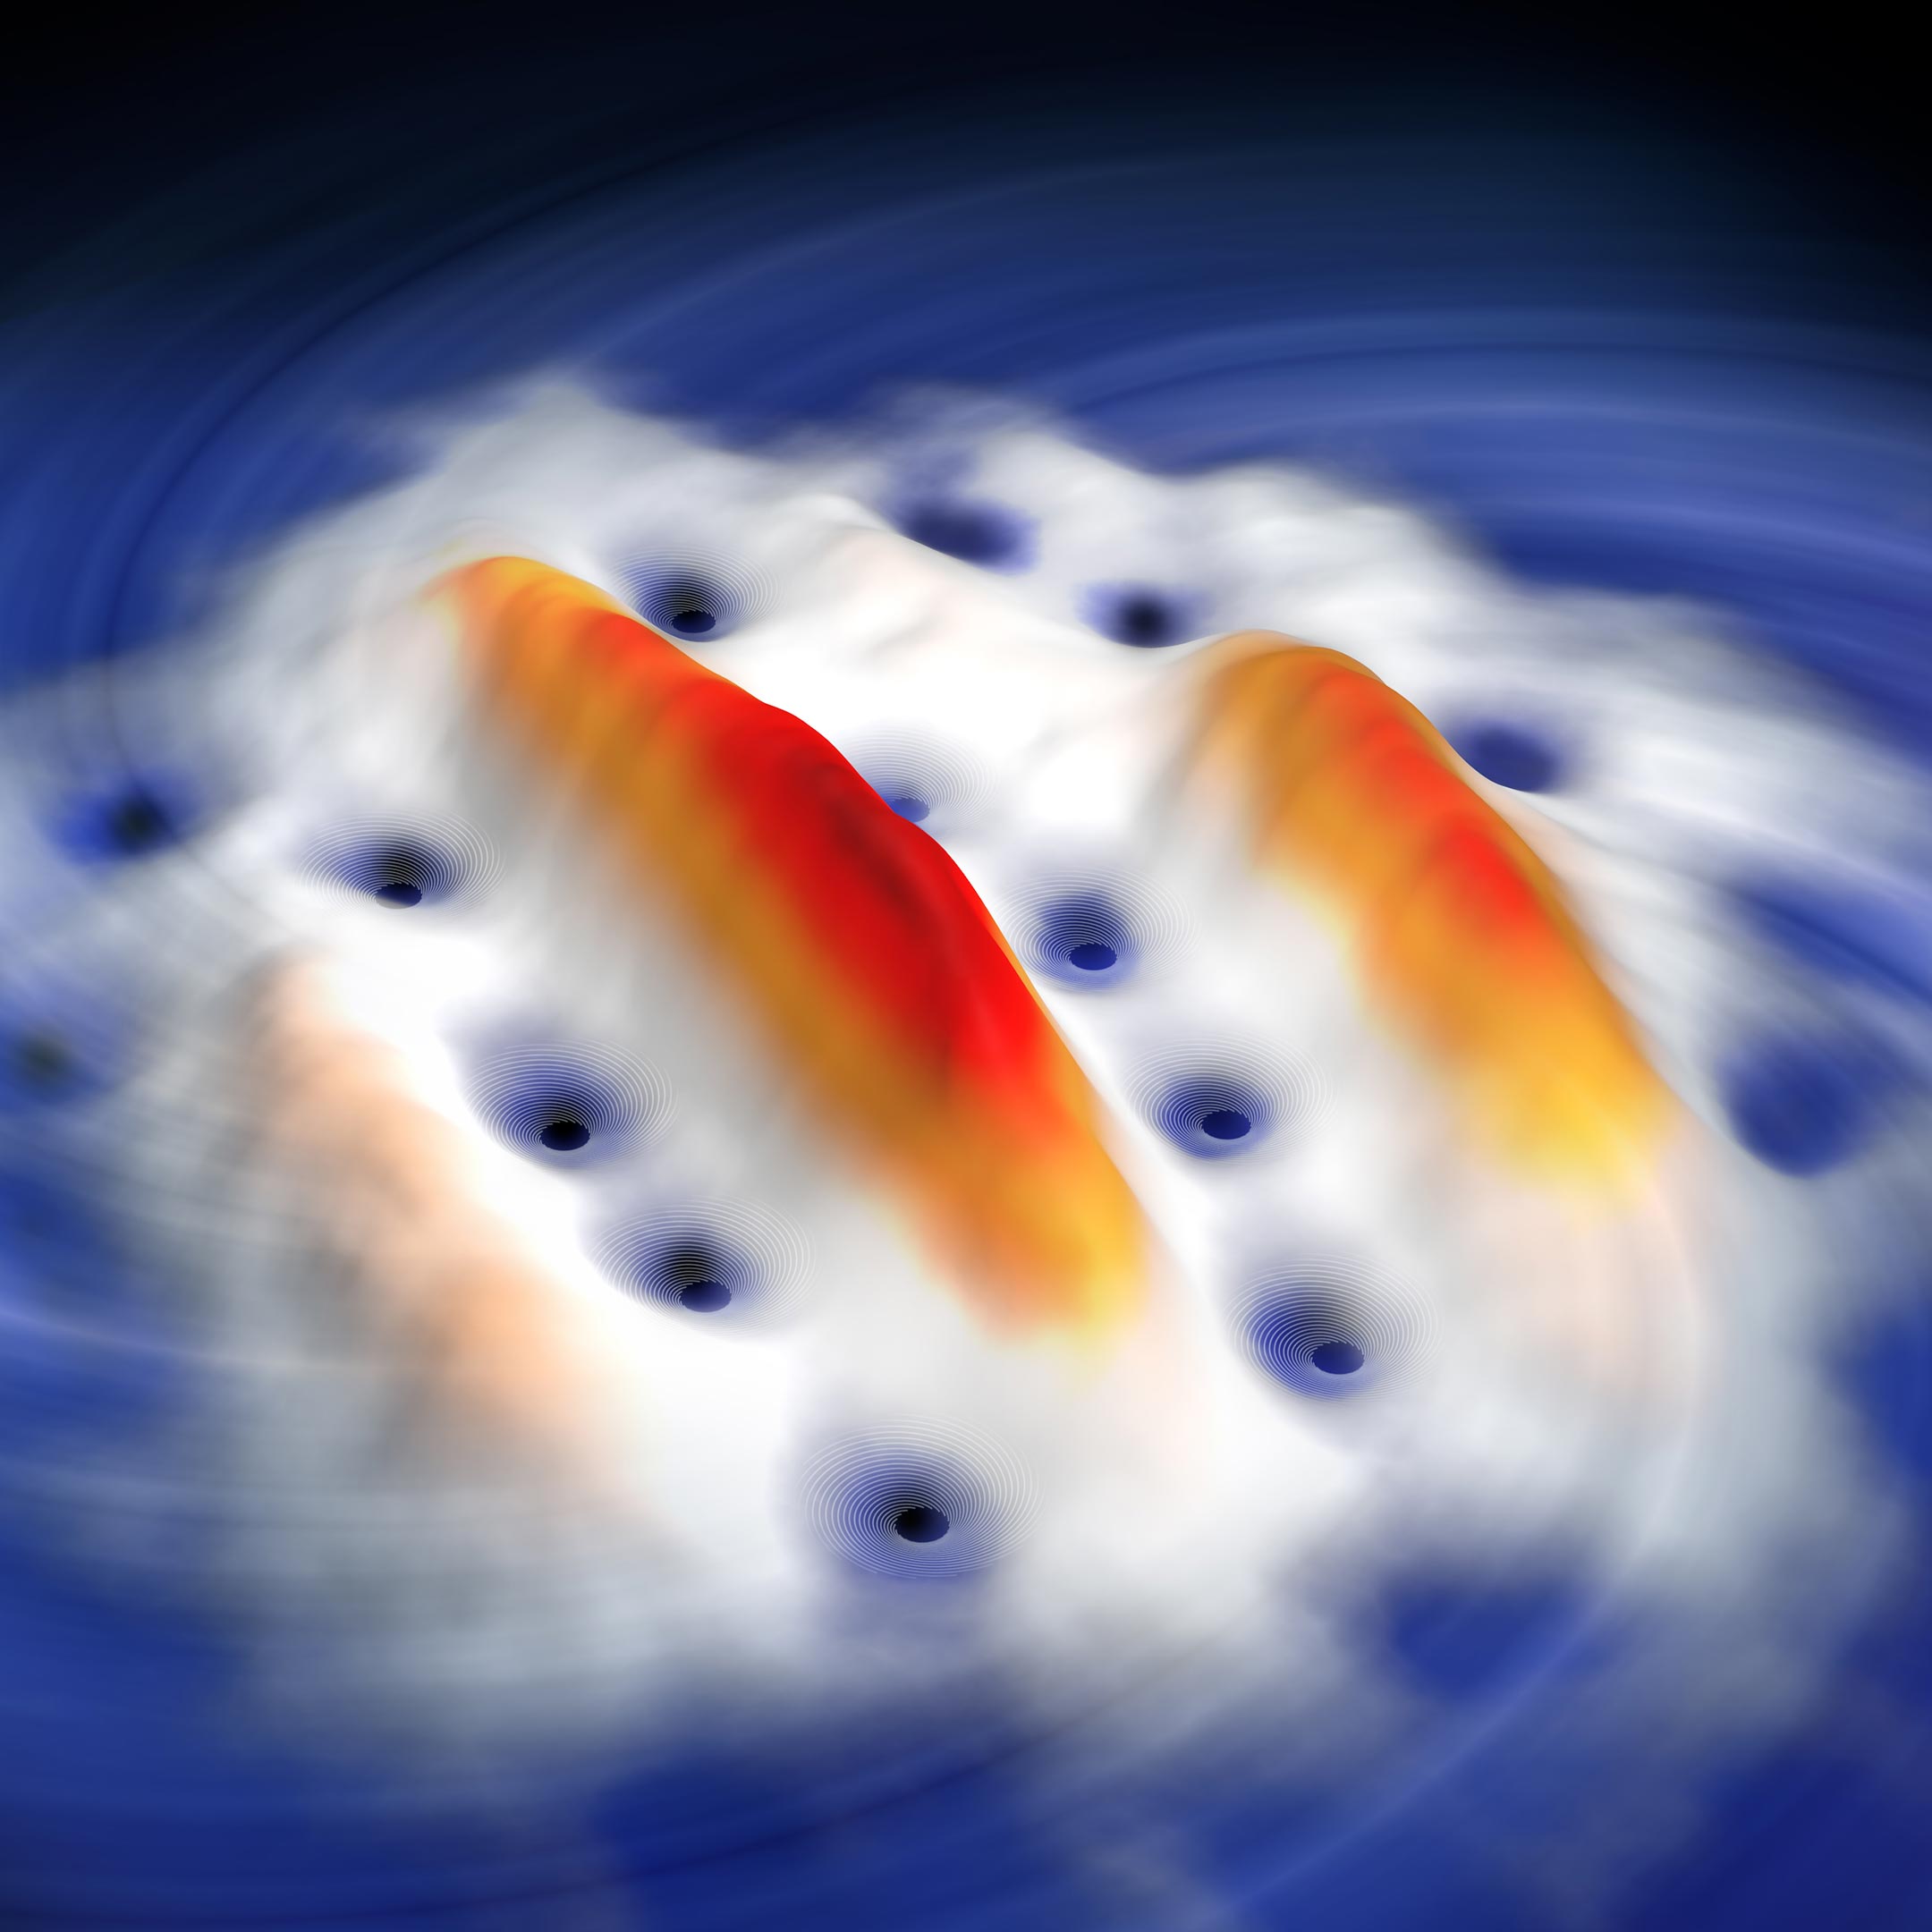 ultra-cold-mini-twisters-quantum-vortices-are-a-strong-indication-of-superfluidity